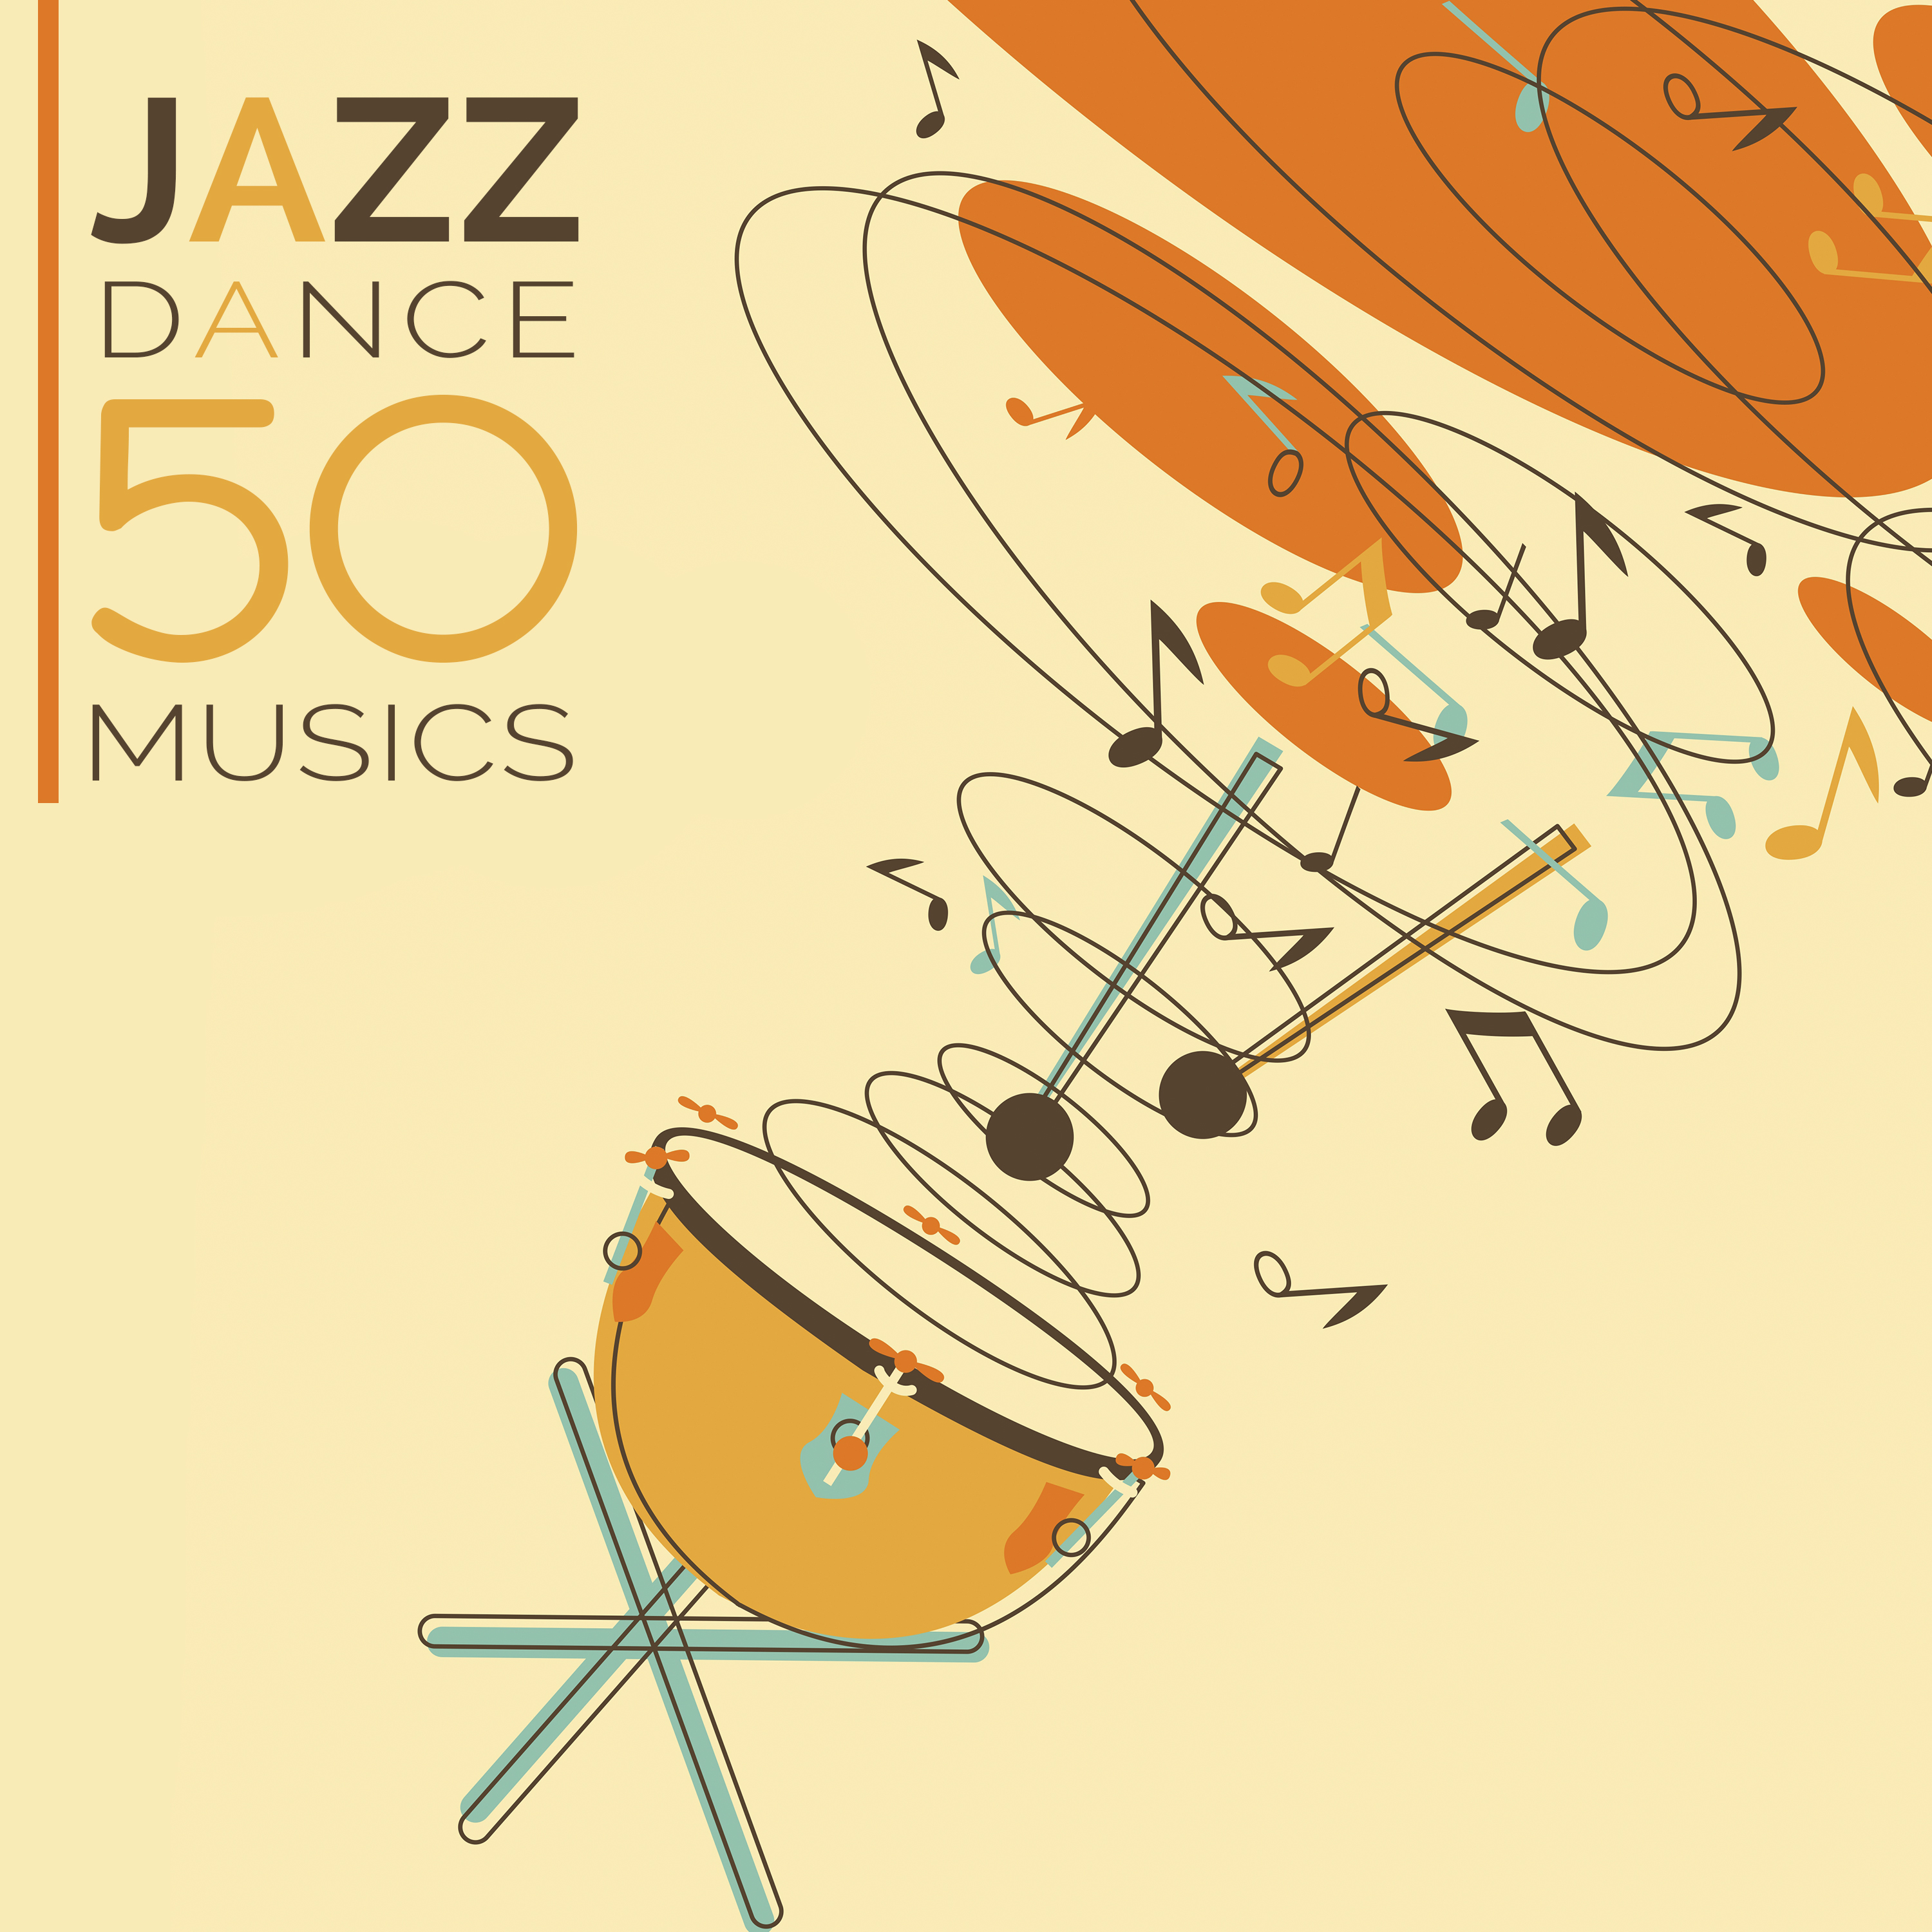 Jazz Dance – 50 Musics for Cocktails Party, Dinner, Lounge Bar, Restaurant, Dancing Classes, Best Background Music, Relaxing